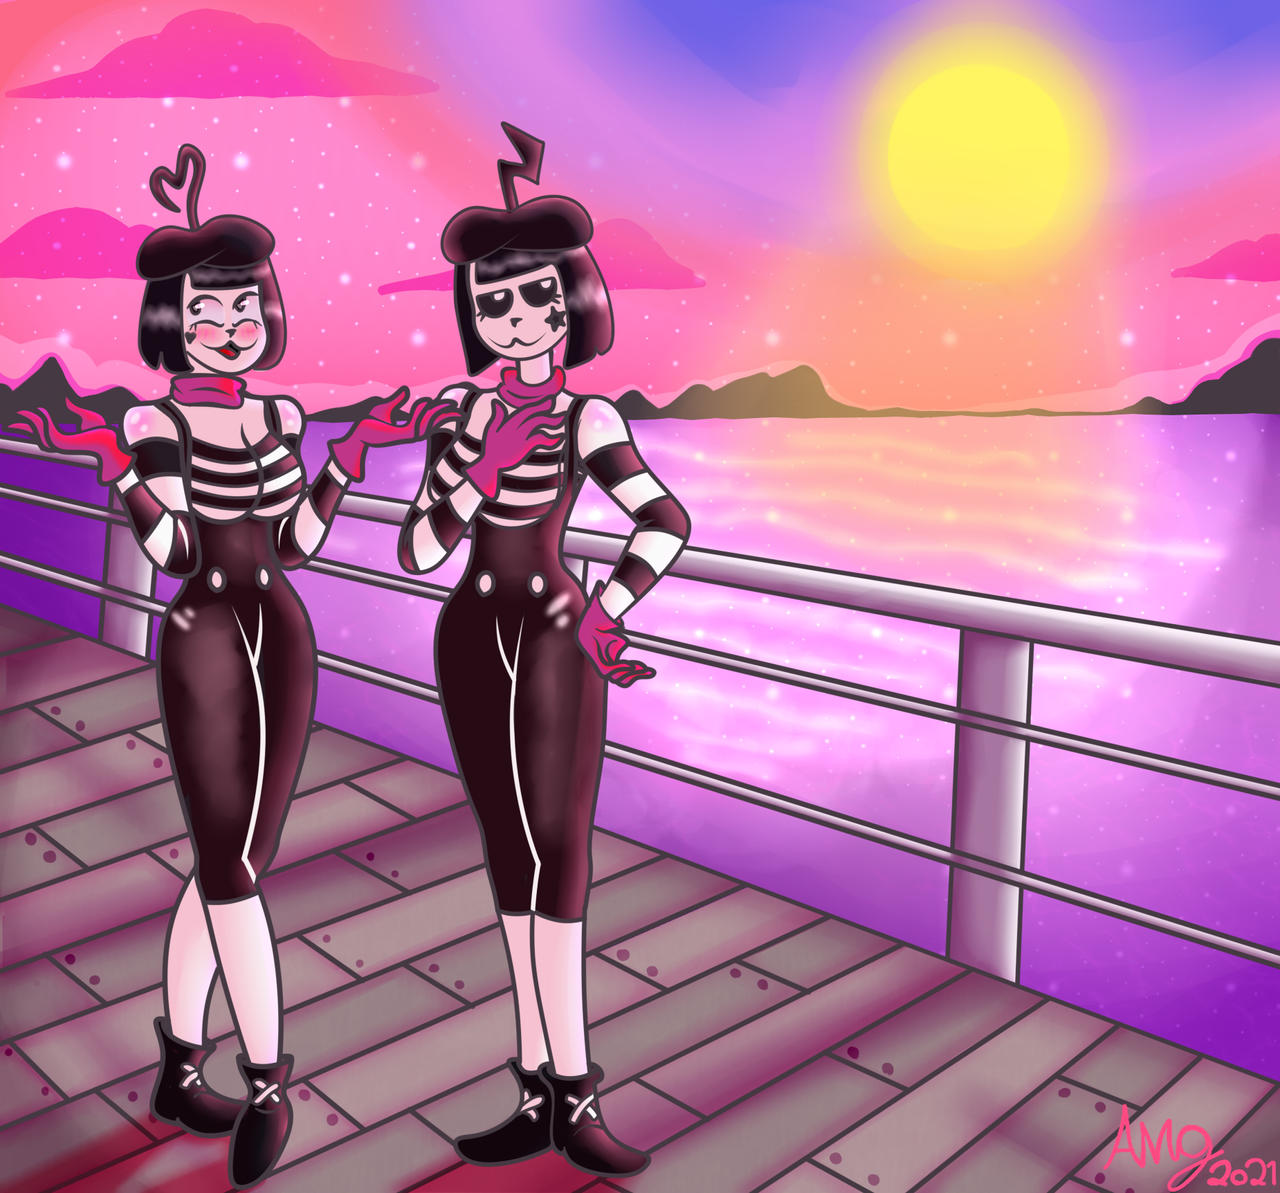 BonBon and ChuChu from MIME AND DASH by Amergames on DeviantArt